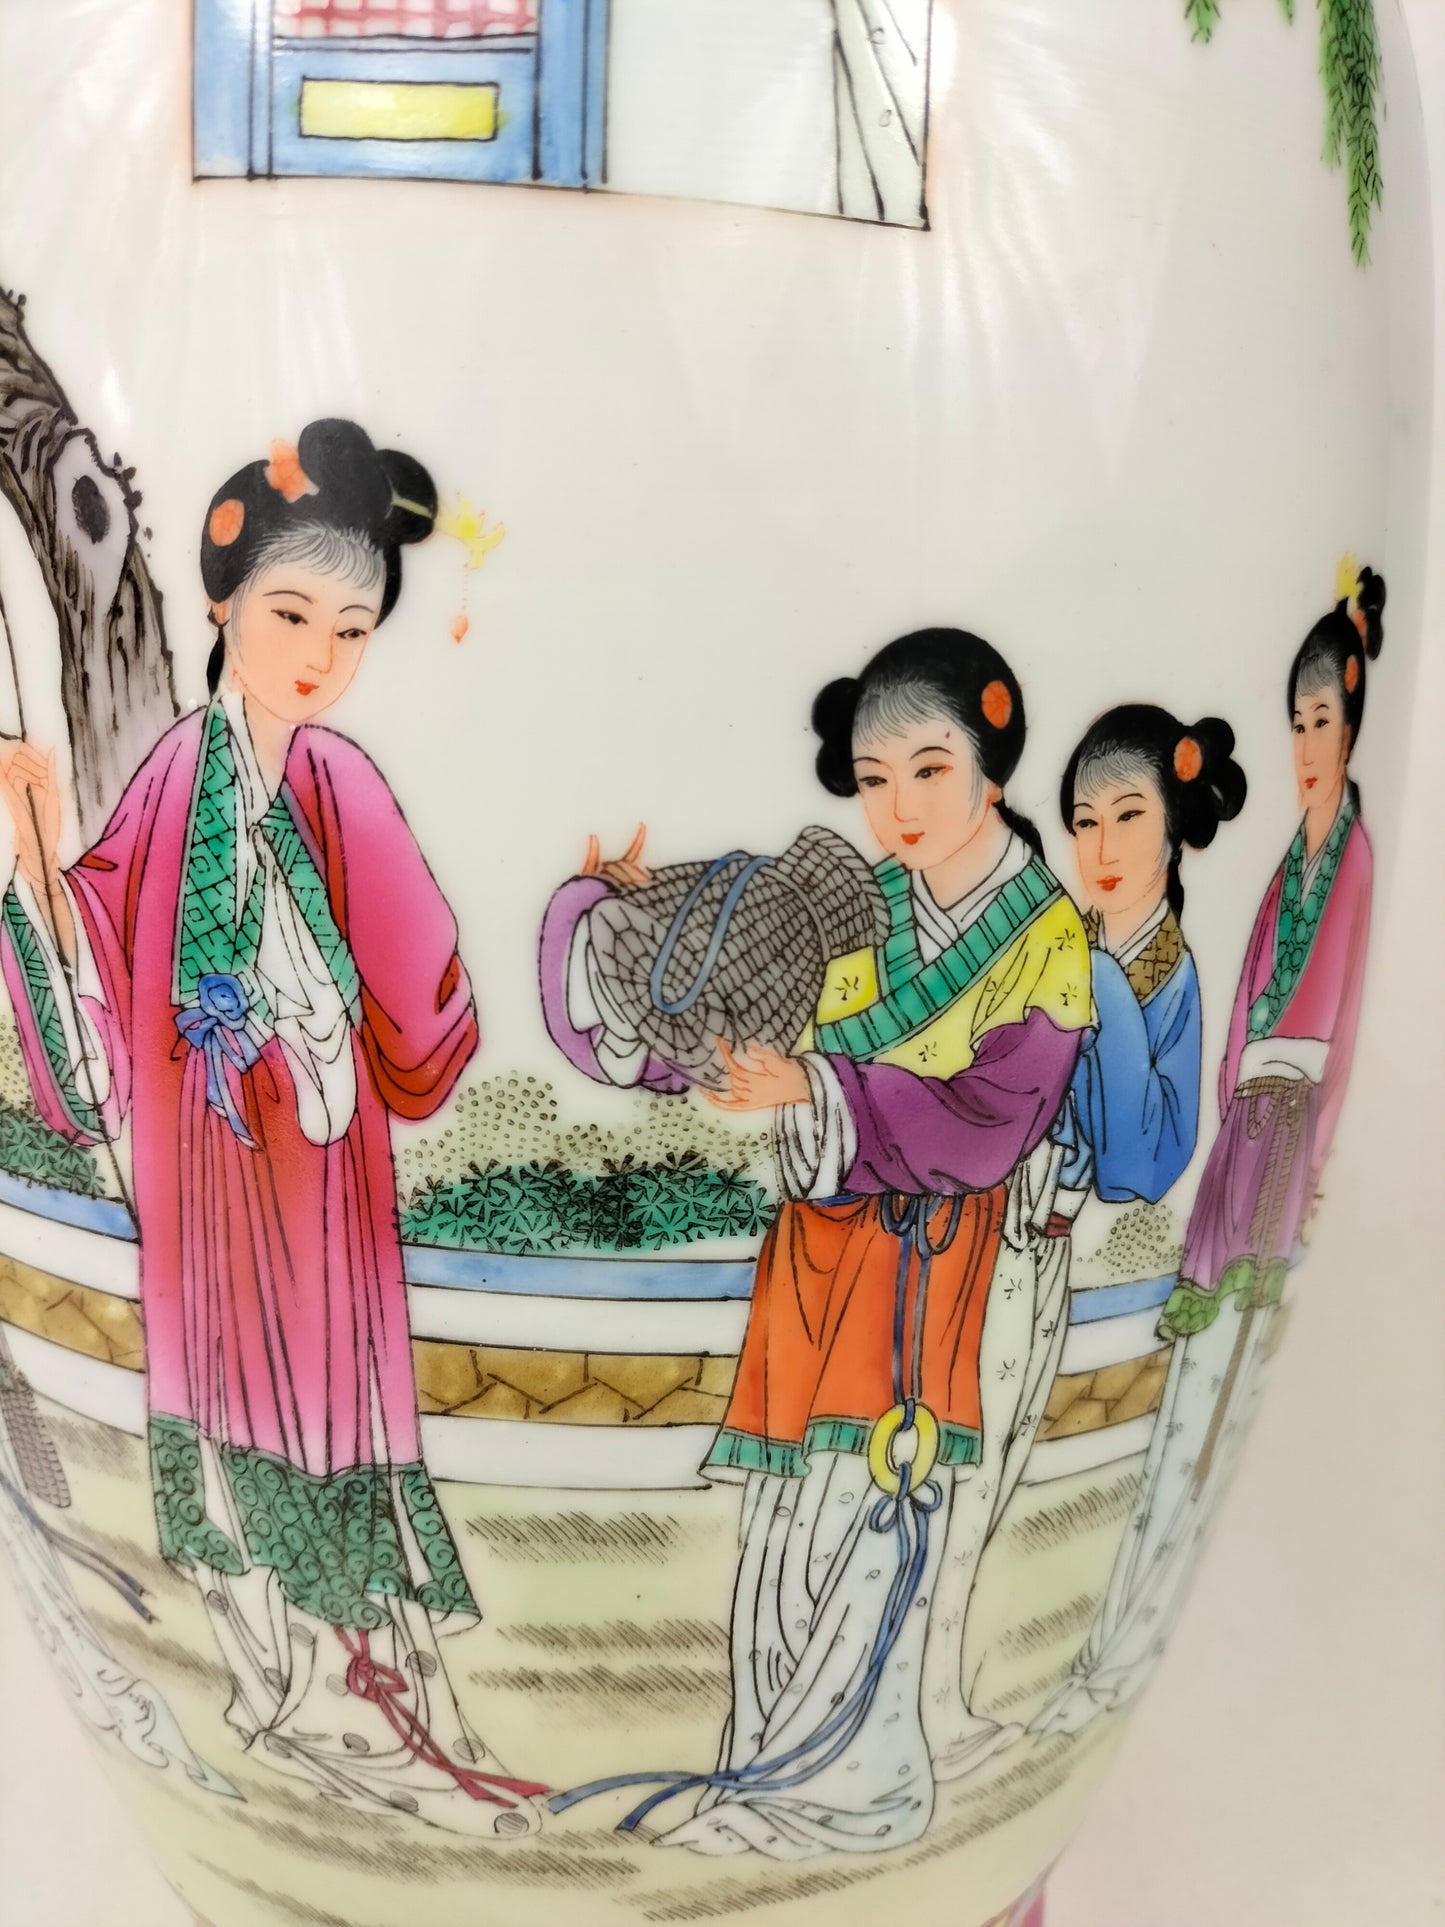 Chinese famille rose vase decorated with a garden scene // Jingdezhen - Qianlong mark - 20th century